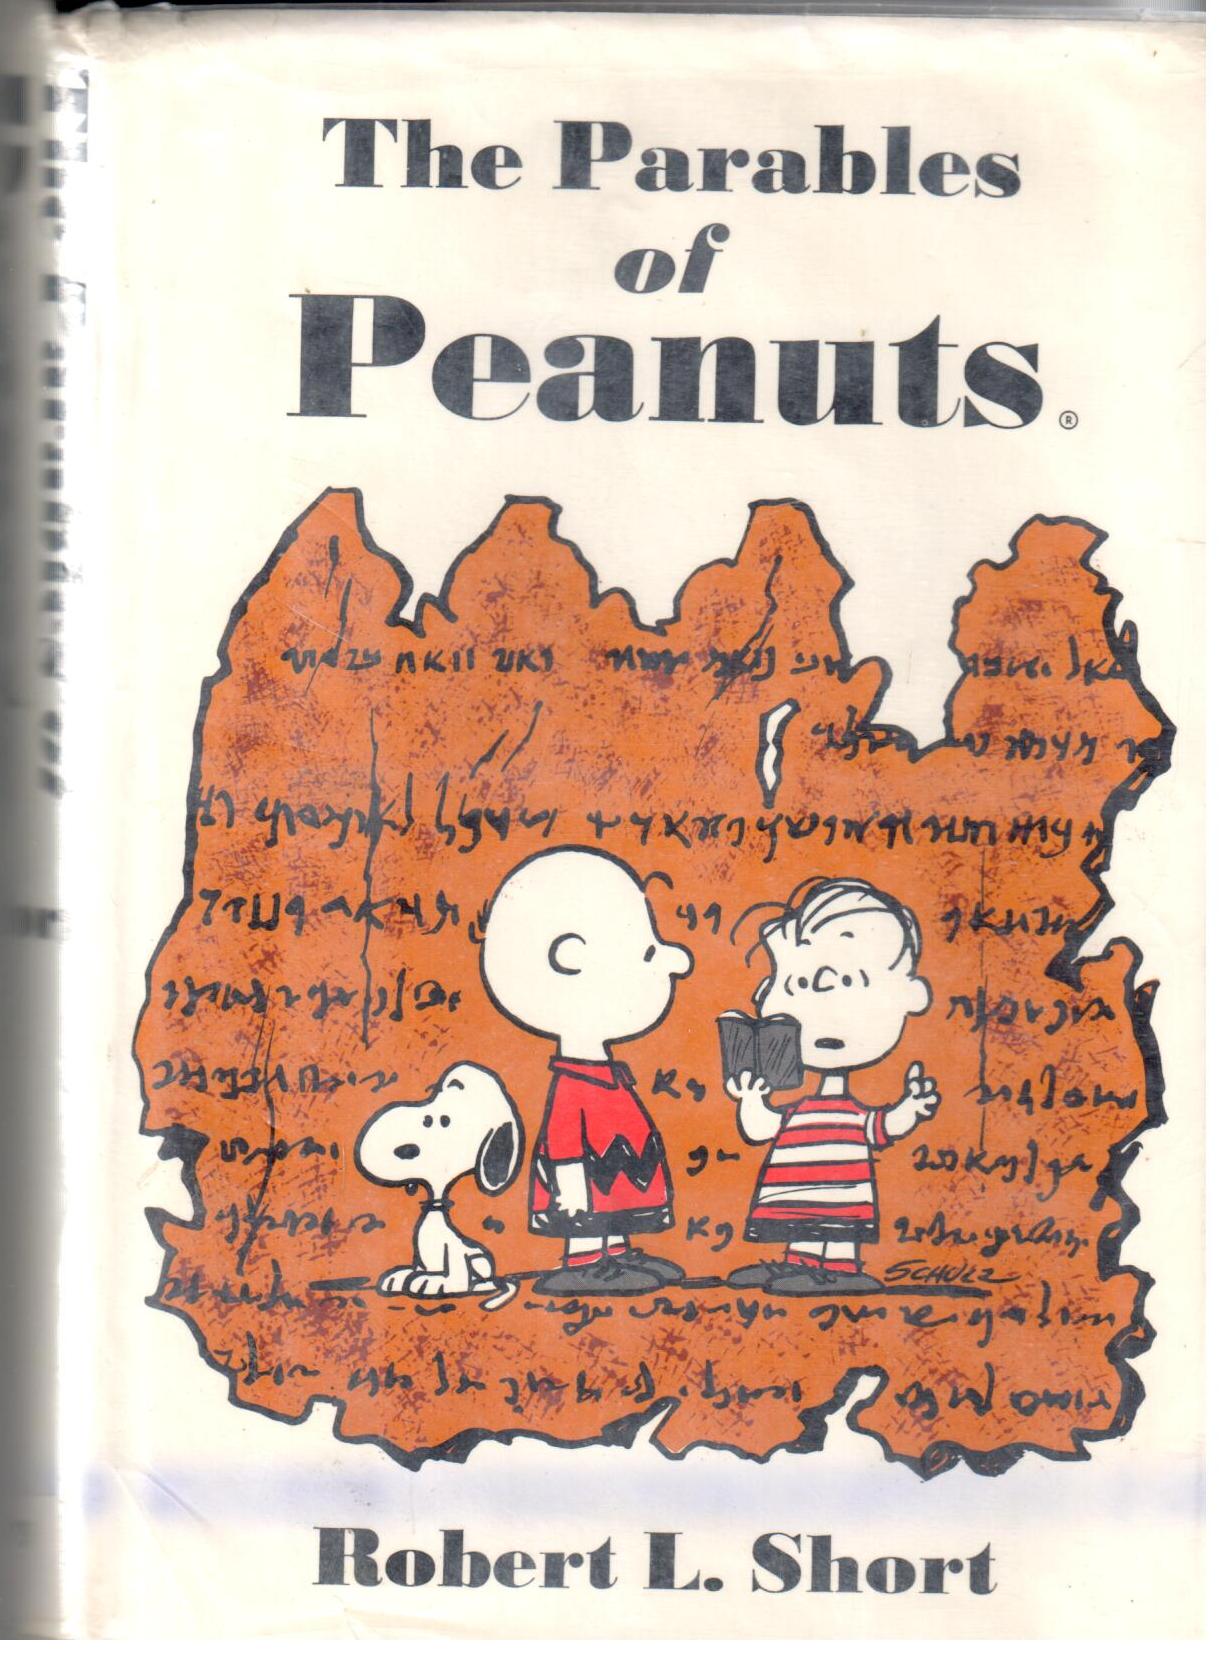 The parables of Peanuts